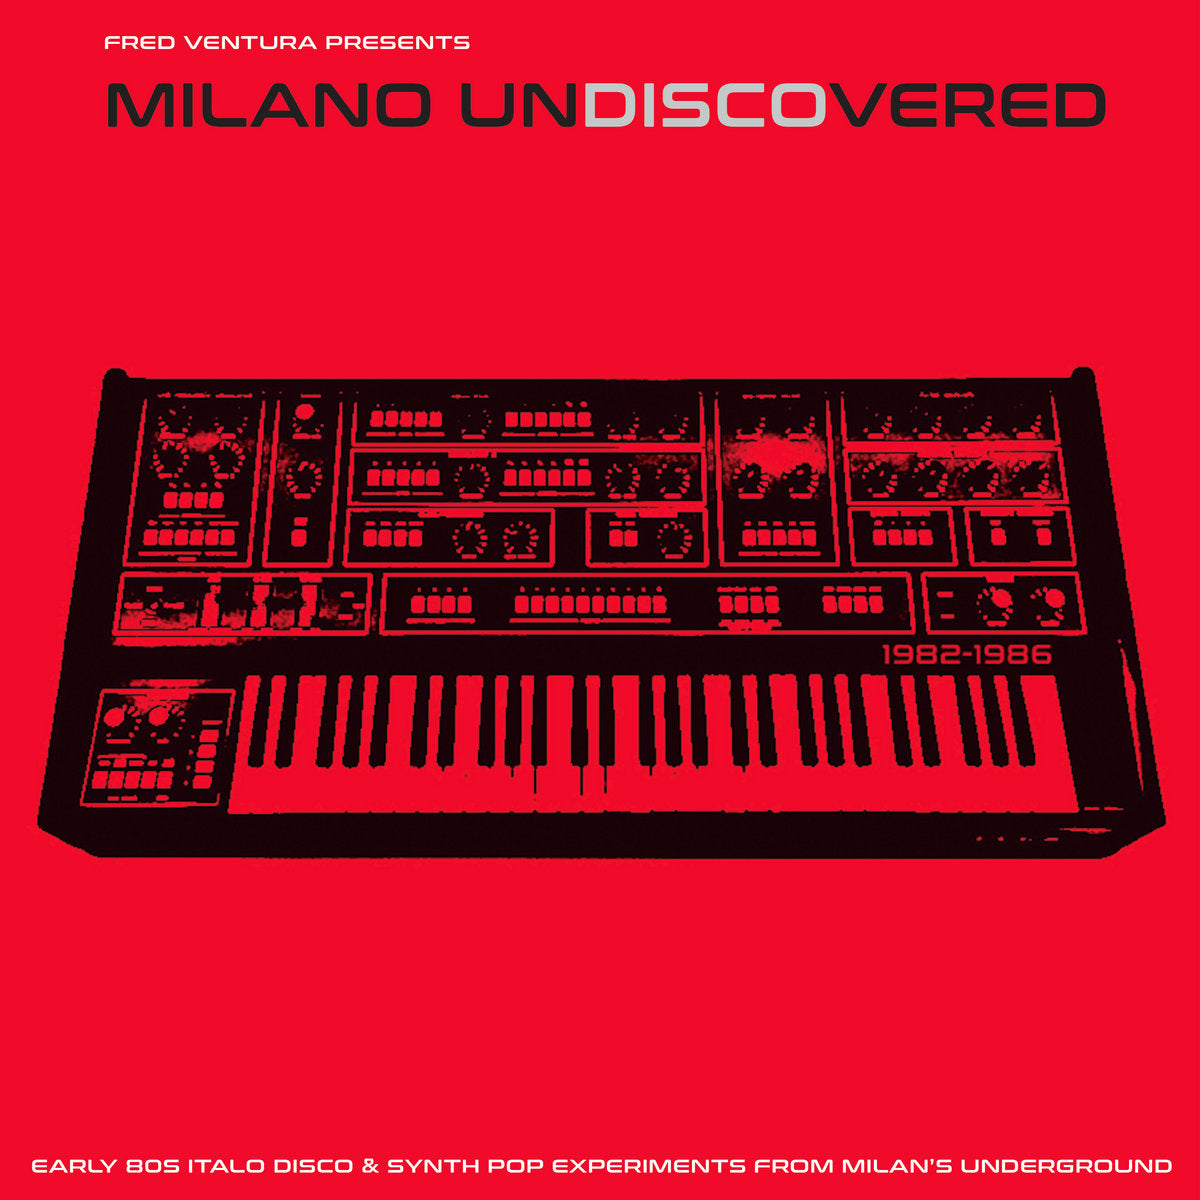 V/A - Milano Undiscovered - Early 80s Electronic Disco Experiments - LP